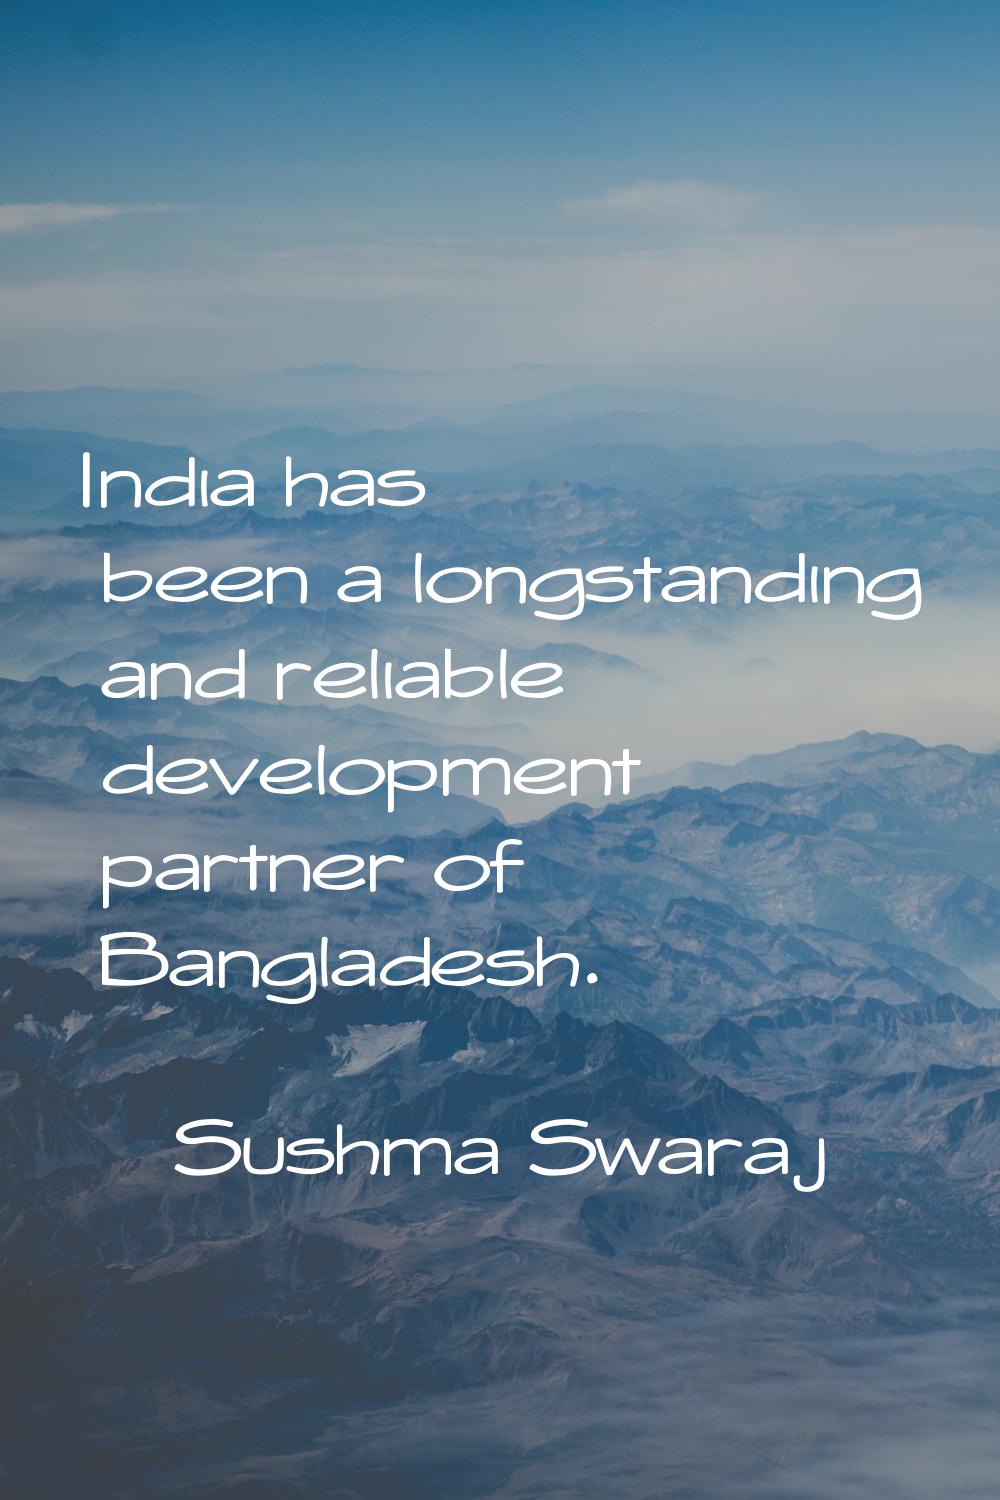 India has been a longstanding and reliable development partner of Bangladesh.